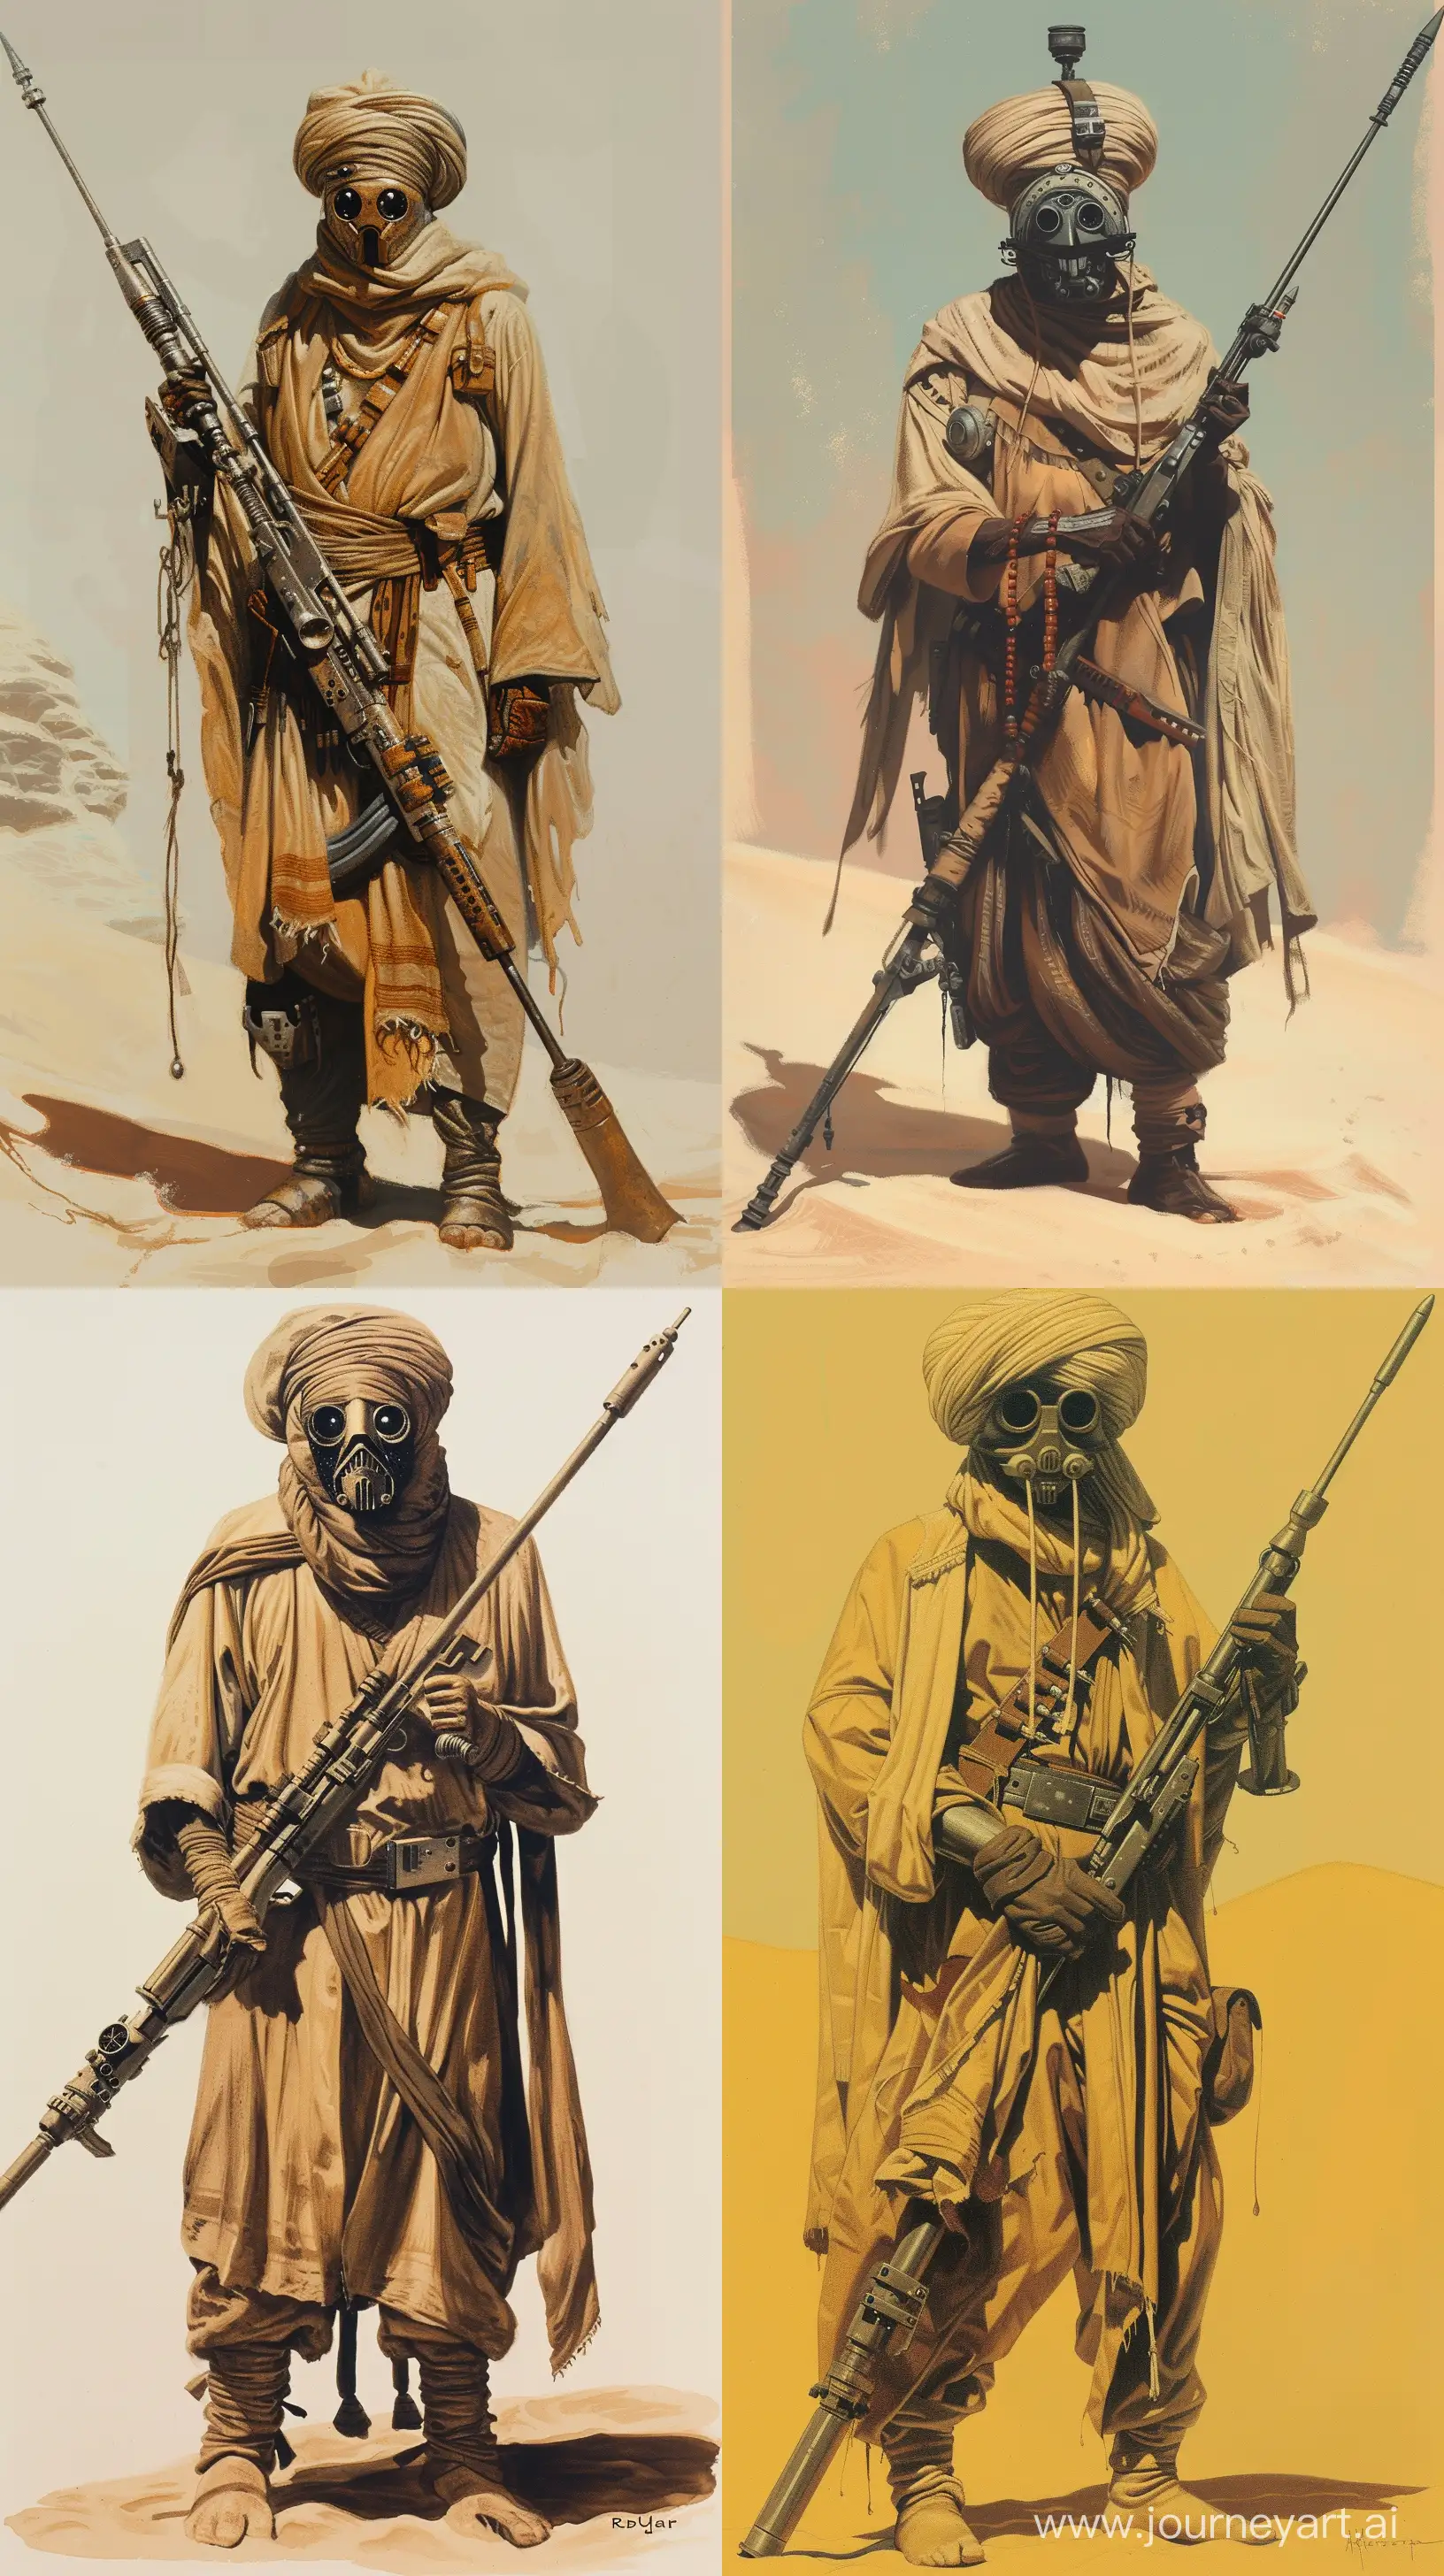 Old concept art by Ralph McQuarrie of a thin menacing desert assassin droid in turban and robes holding a long thin rifle. similar to a Tusken raider. retro science fiction art. in color. --ar 9:16

